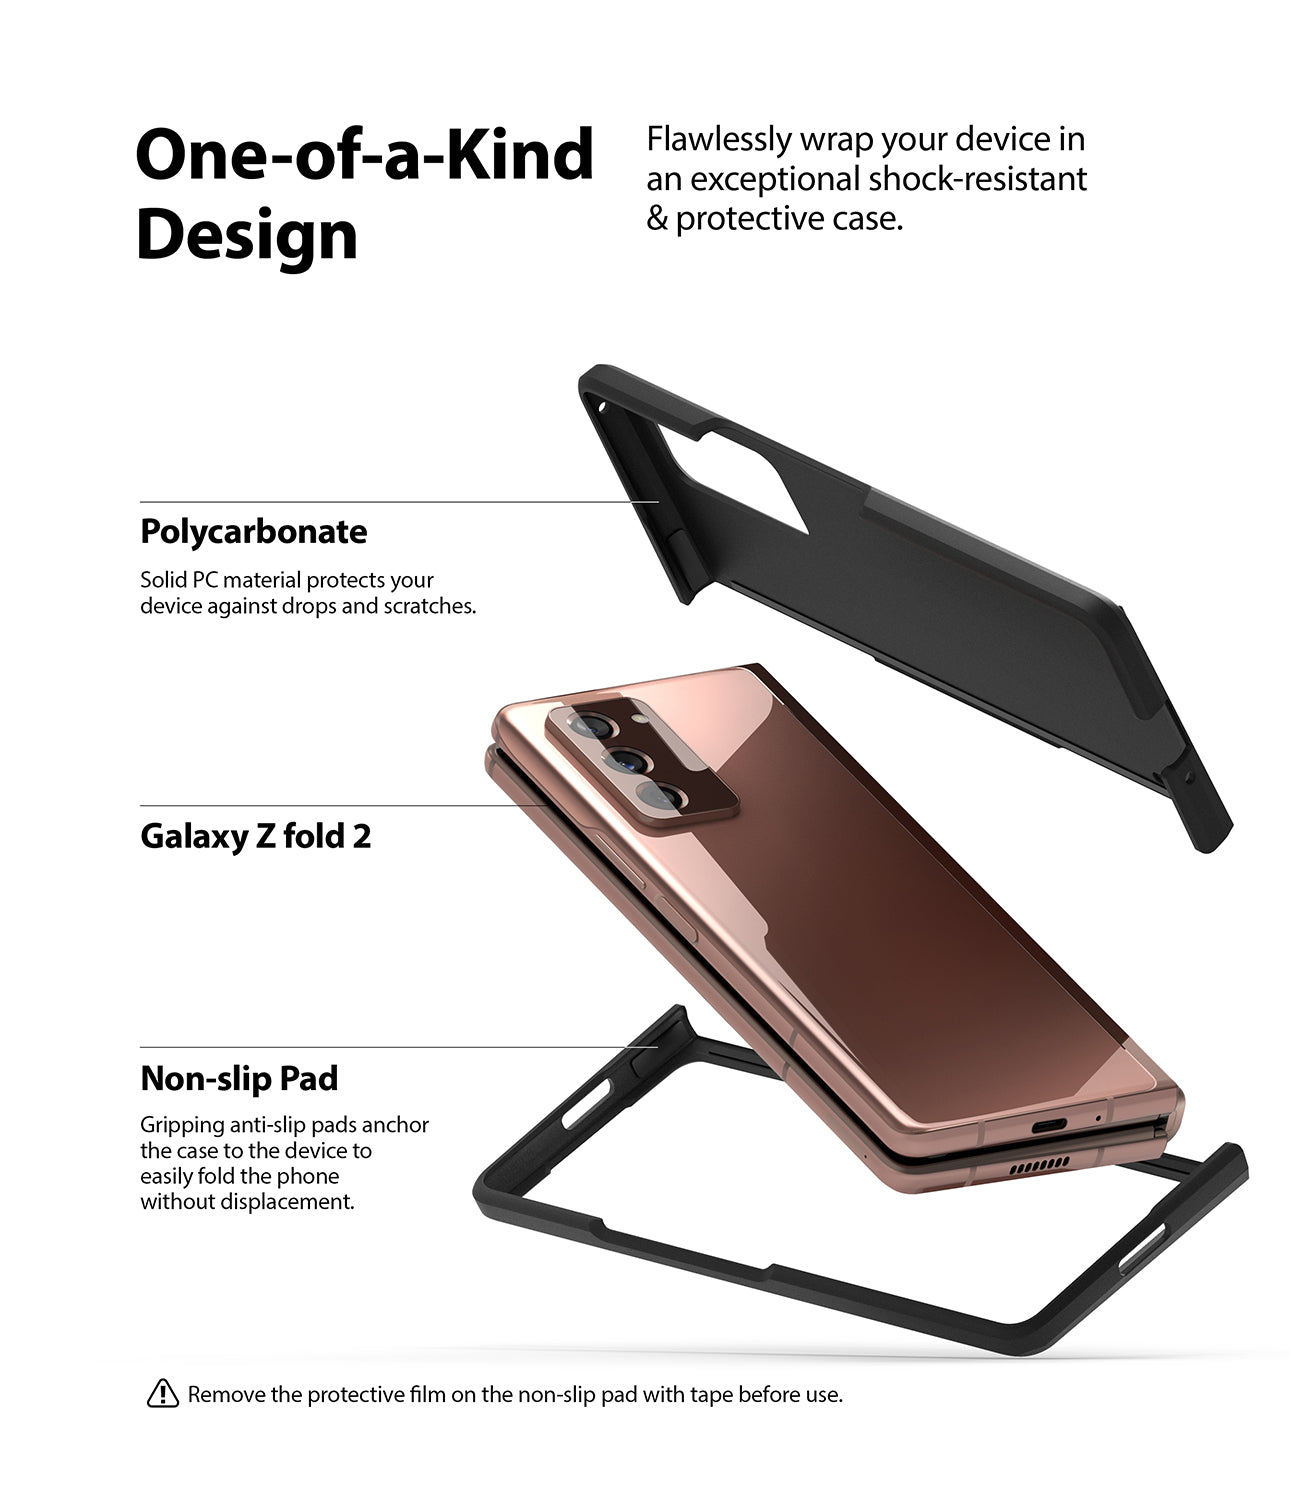 flawlessly wrap your device in an exceptional shock-resistant and protective case